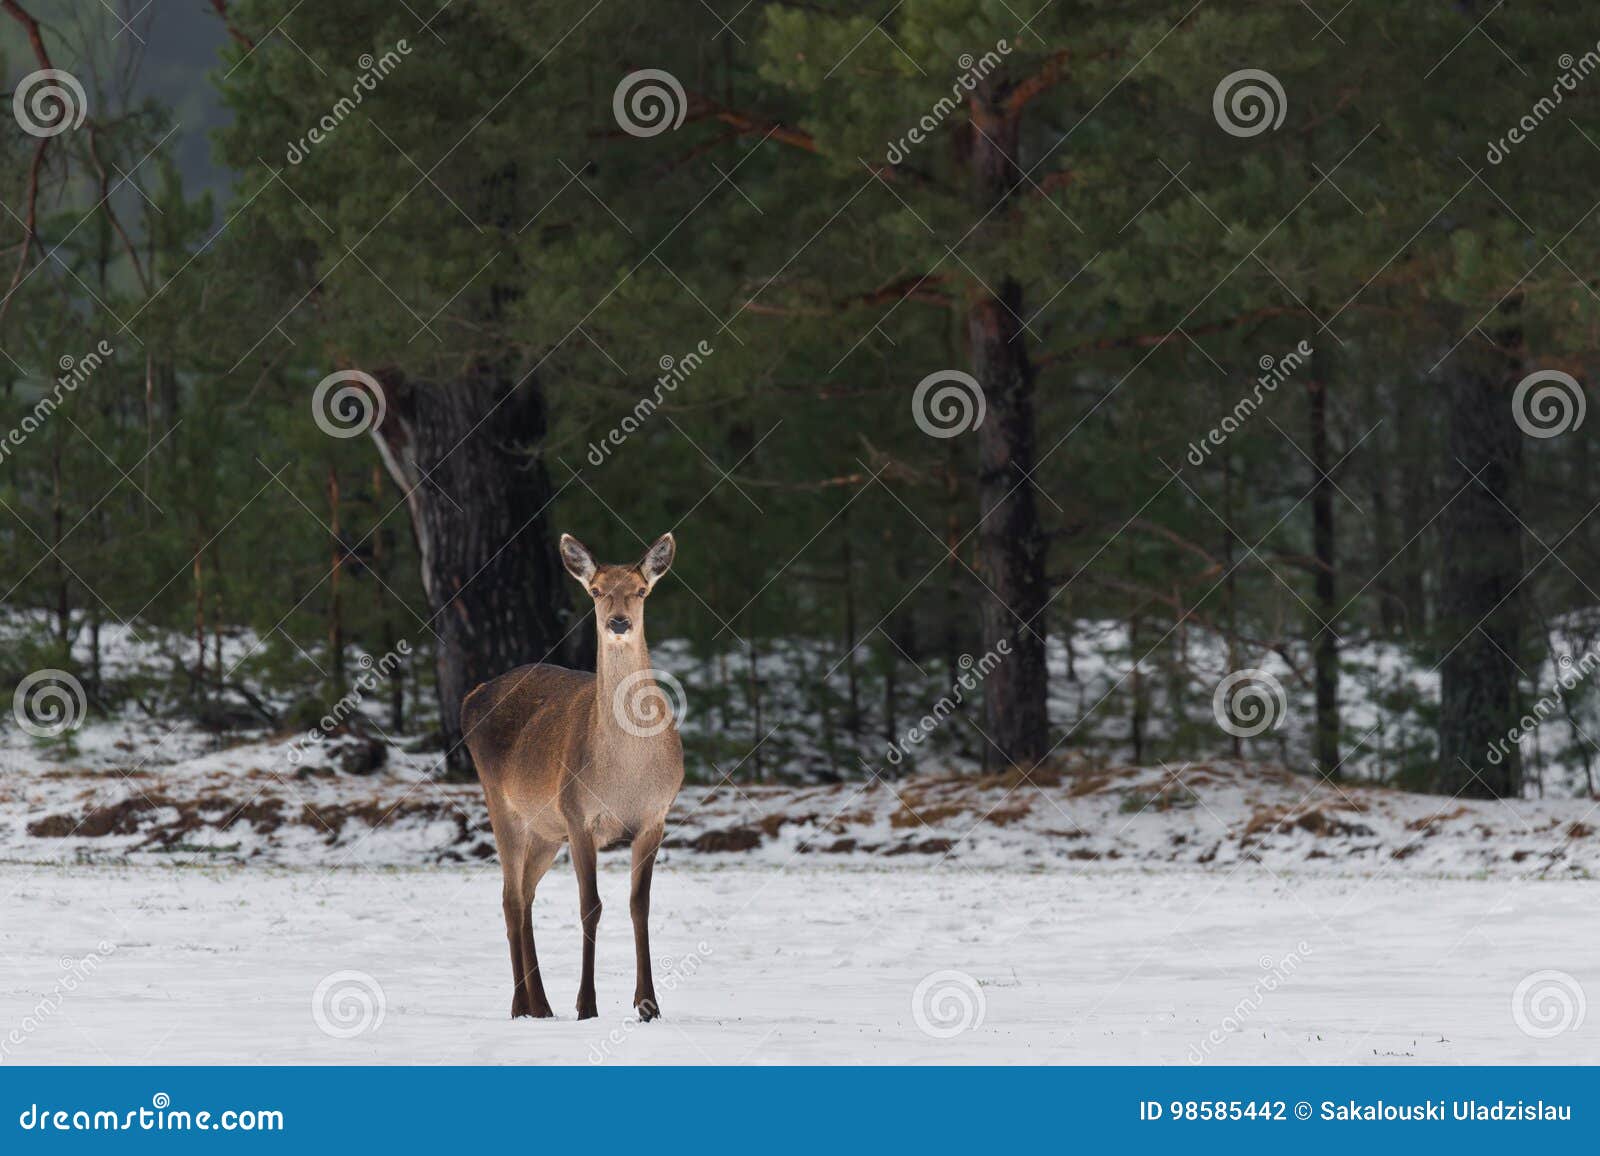 single adult female red deer on snowy field at pine forest background. european wildlife landscape with snow and deer cervidae